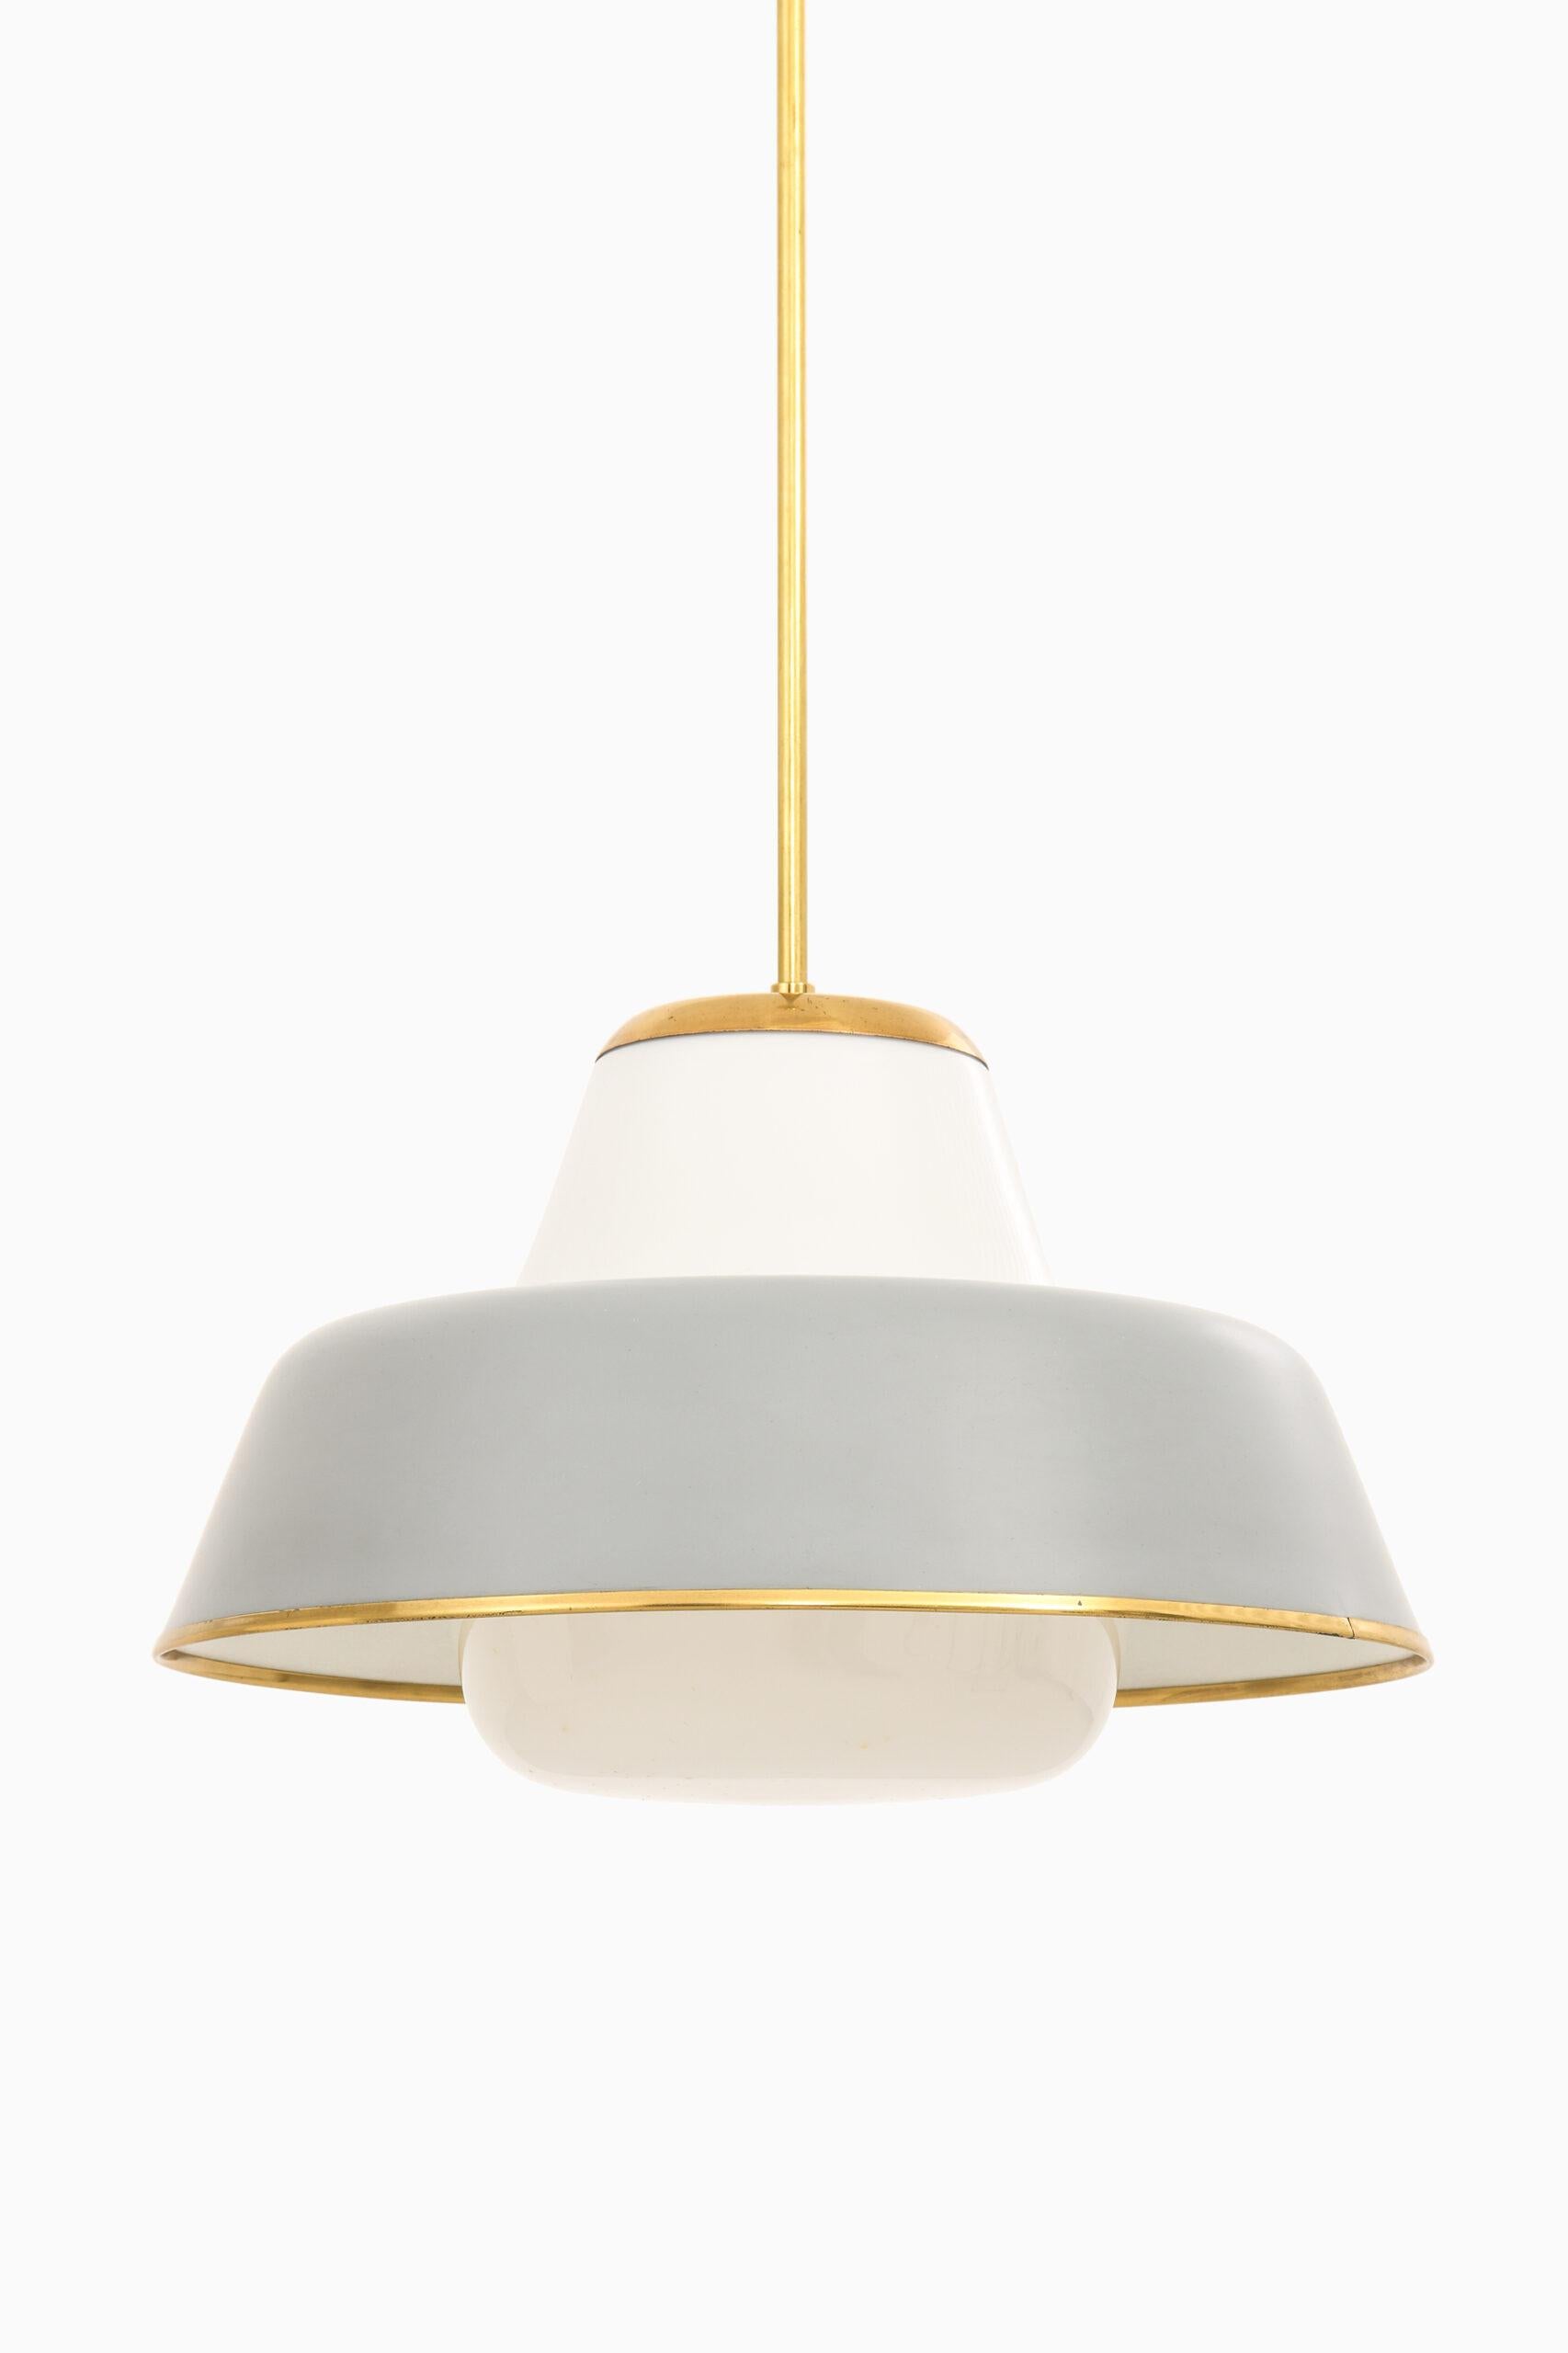 Scandinavian Modern Lisa Johansson-Pape Ceiling Lamps Model 61-347 Produced by Orno in Finland For Sale